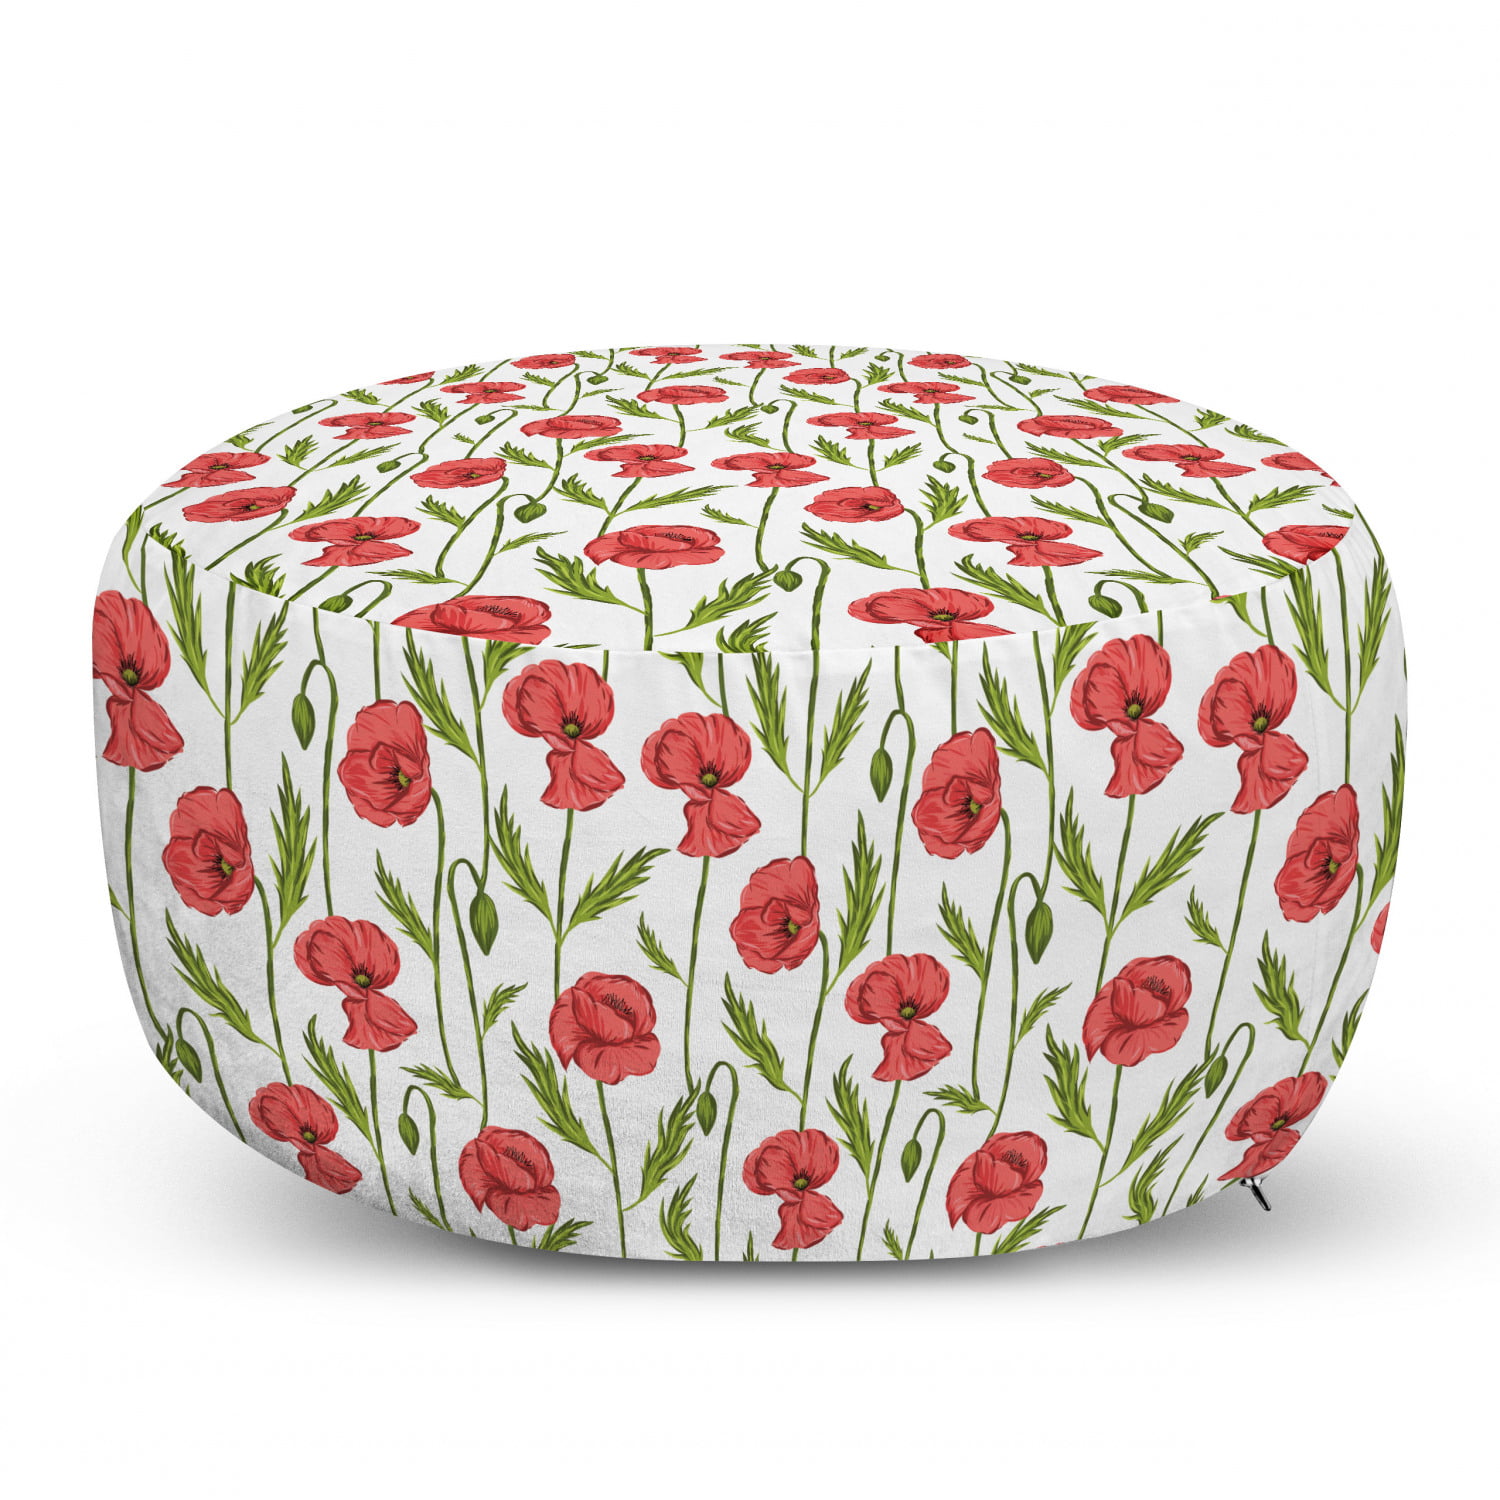 Fern Green Burgundy and Pink 25 Gardening Leaves and Blossoms Yard Childish Flora Season Print Ambesonne Botanical Rectangle Pouf Under Desk Foot Stool for Living Room Office Ottoman with Cover